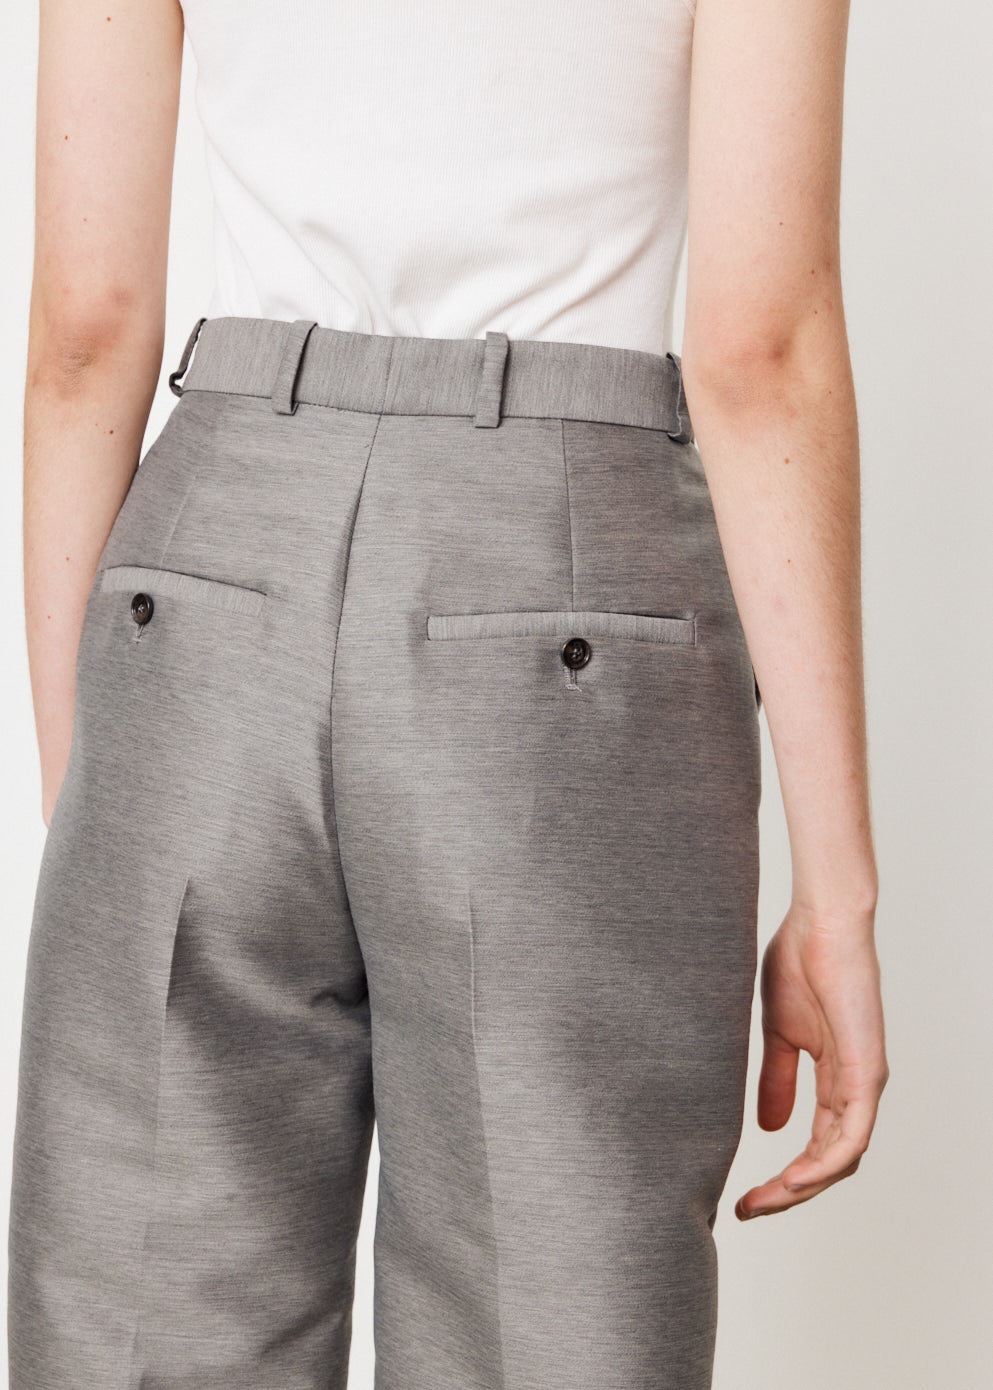 Sewn Pleat Evening Trousers